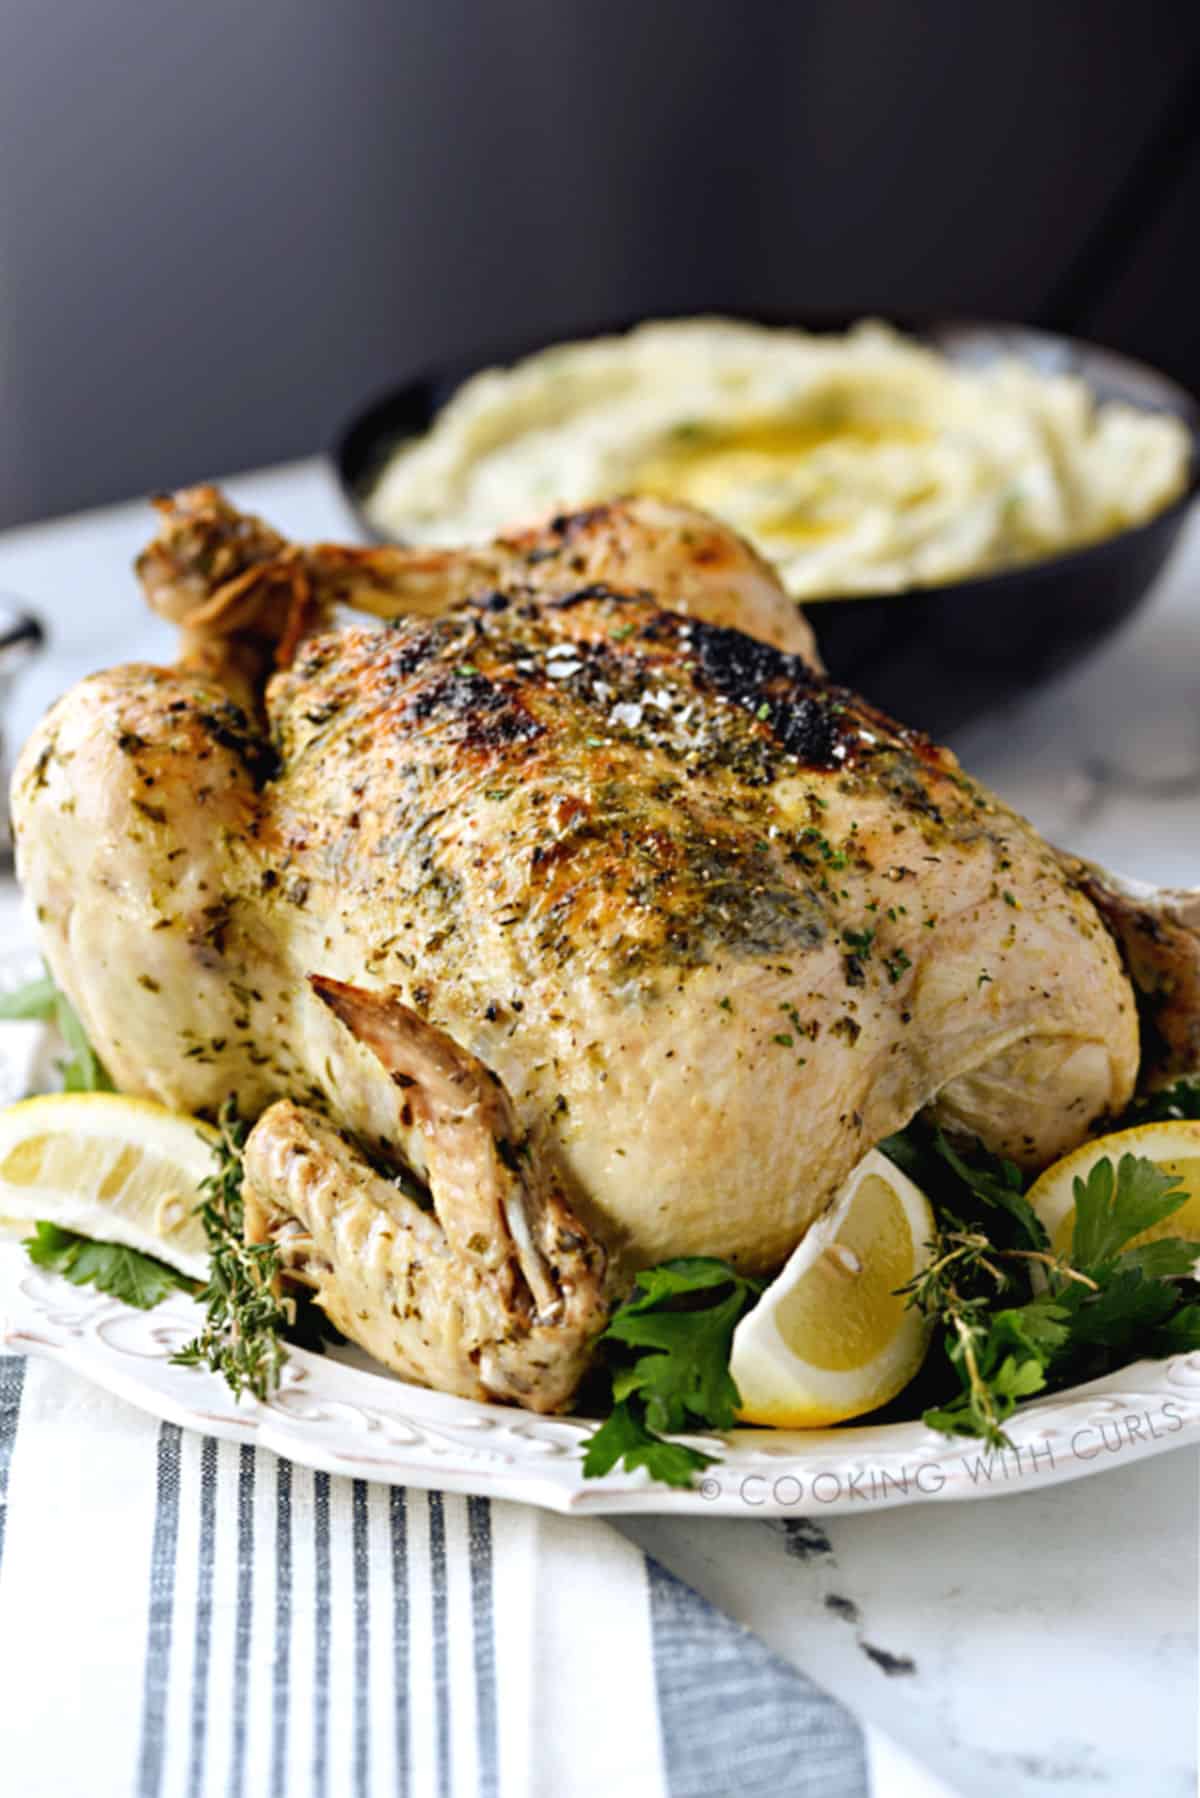 A whole Greek chicken on a white platter surrounded by fresh herbs and lemon wedges with a bowl of mashed potatoes in the background.